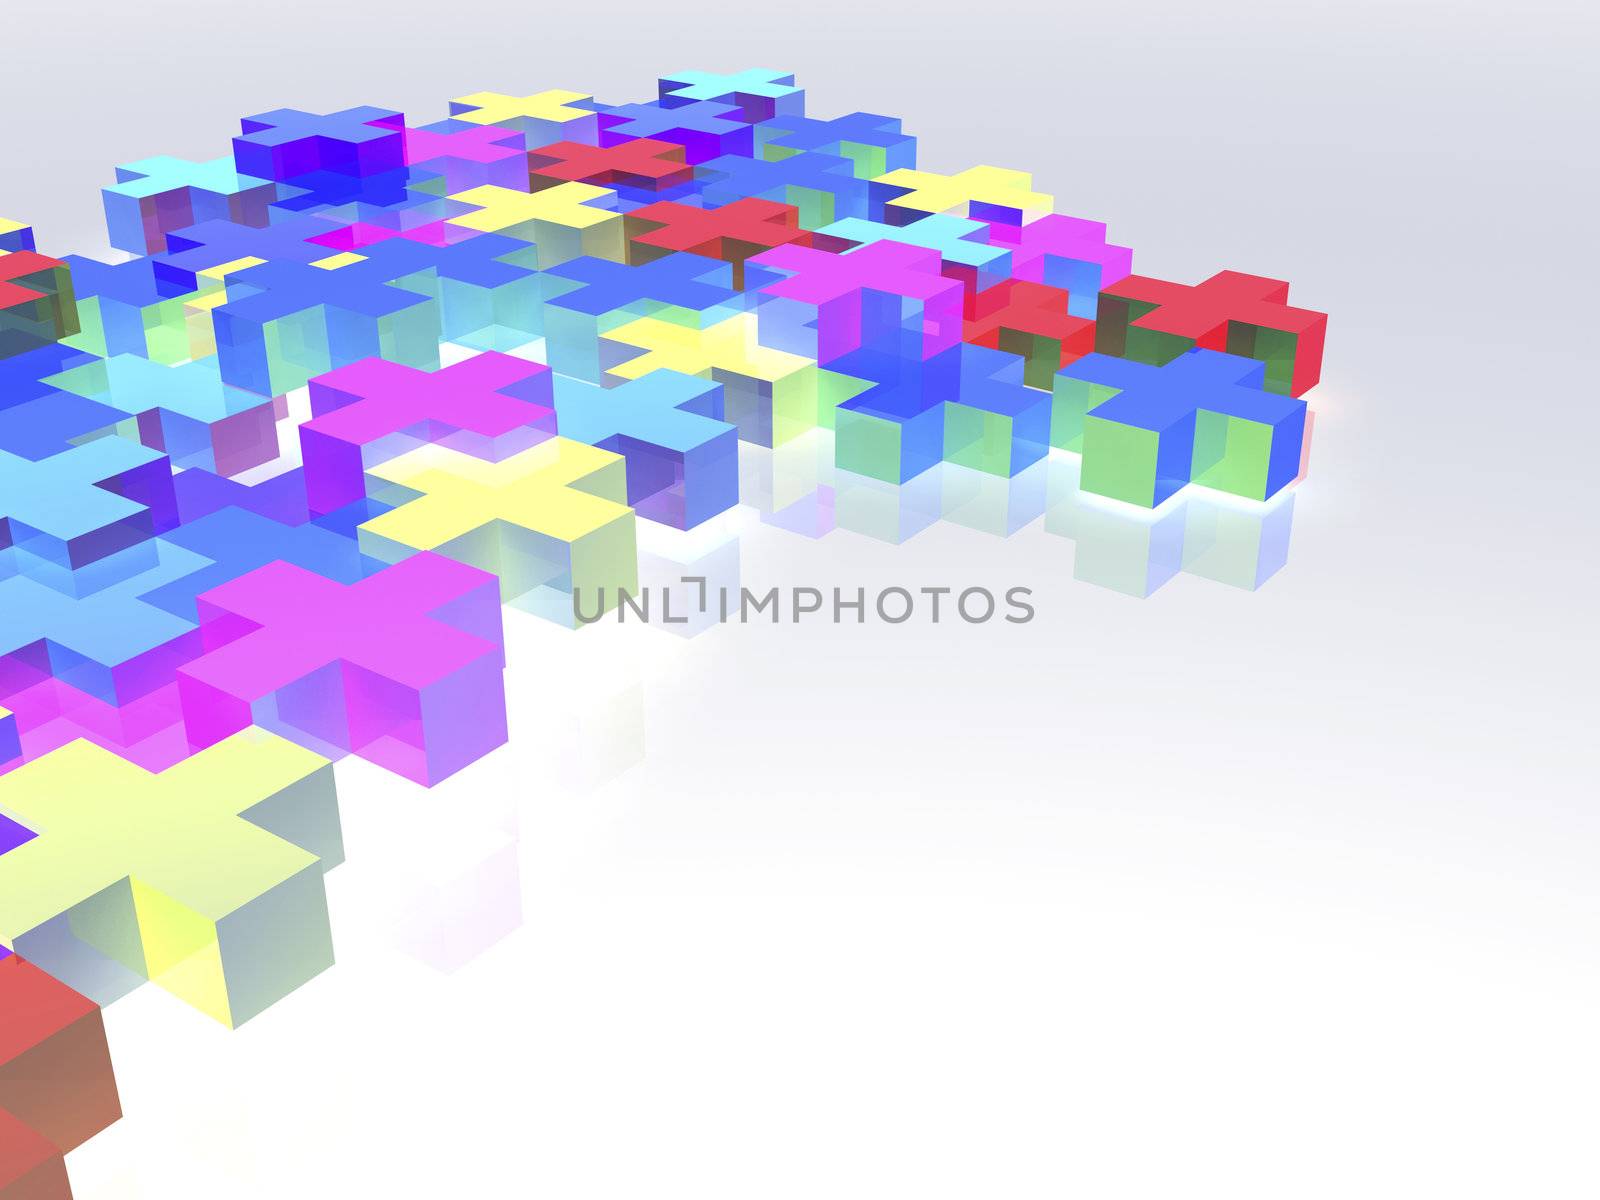 Abstract 3d image with colorful plus symbols